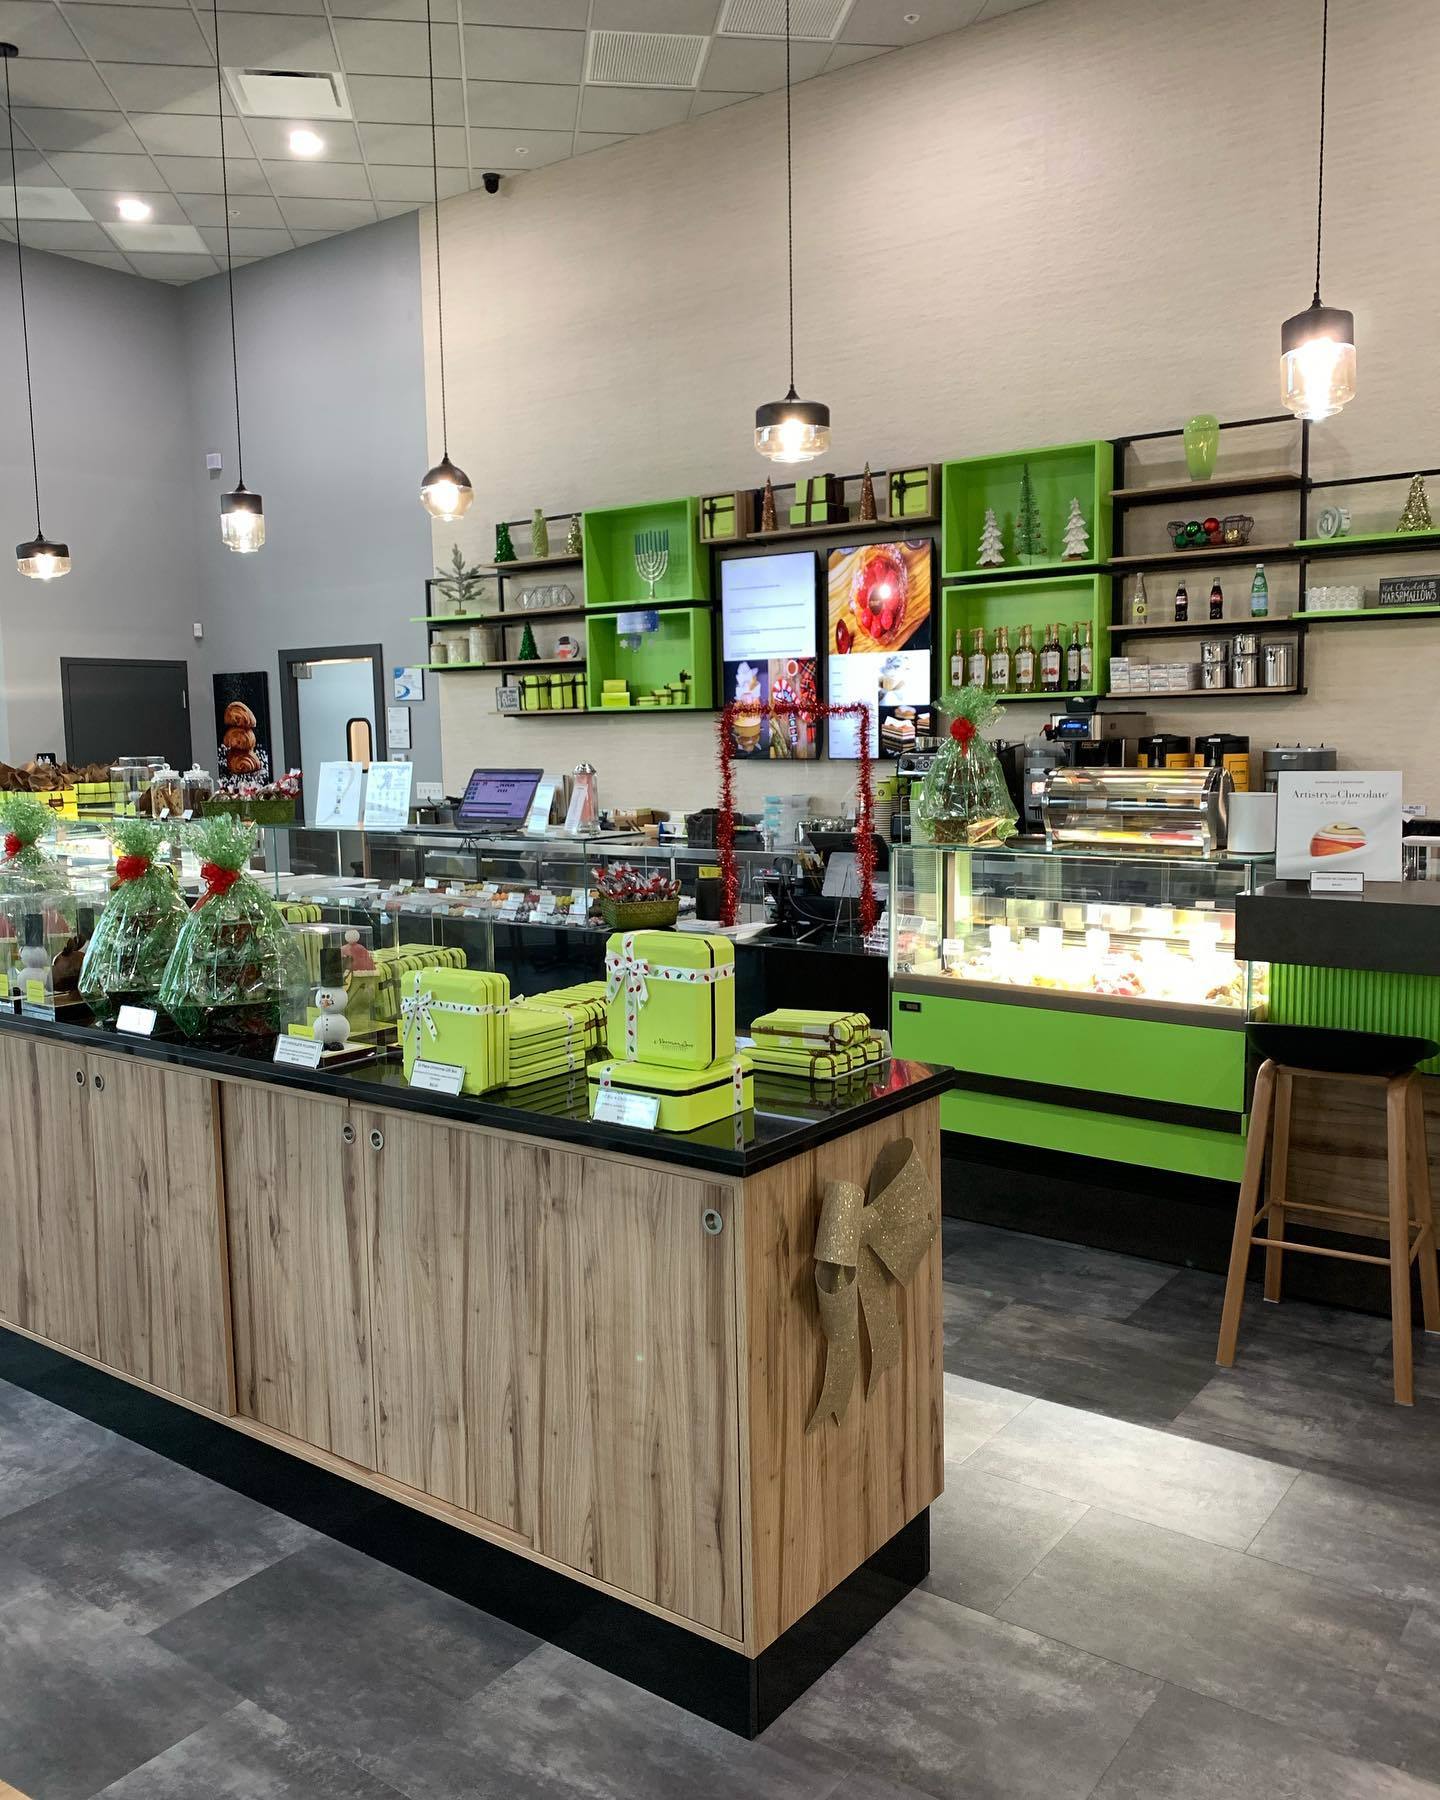 Courtesy. The UTC Sarasota location offers the company’s handcrafted chocolates as well as specialty desserts, artisanal baked goods, novelty products and gelato. It will also serve a selection of wines and coffees.